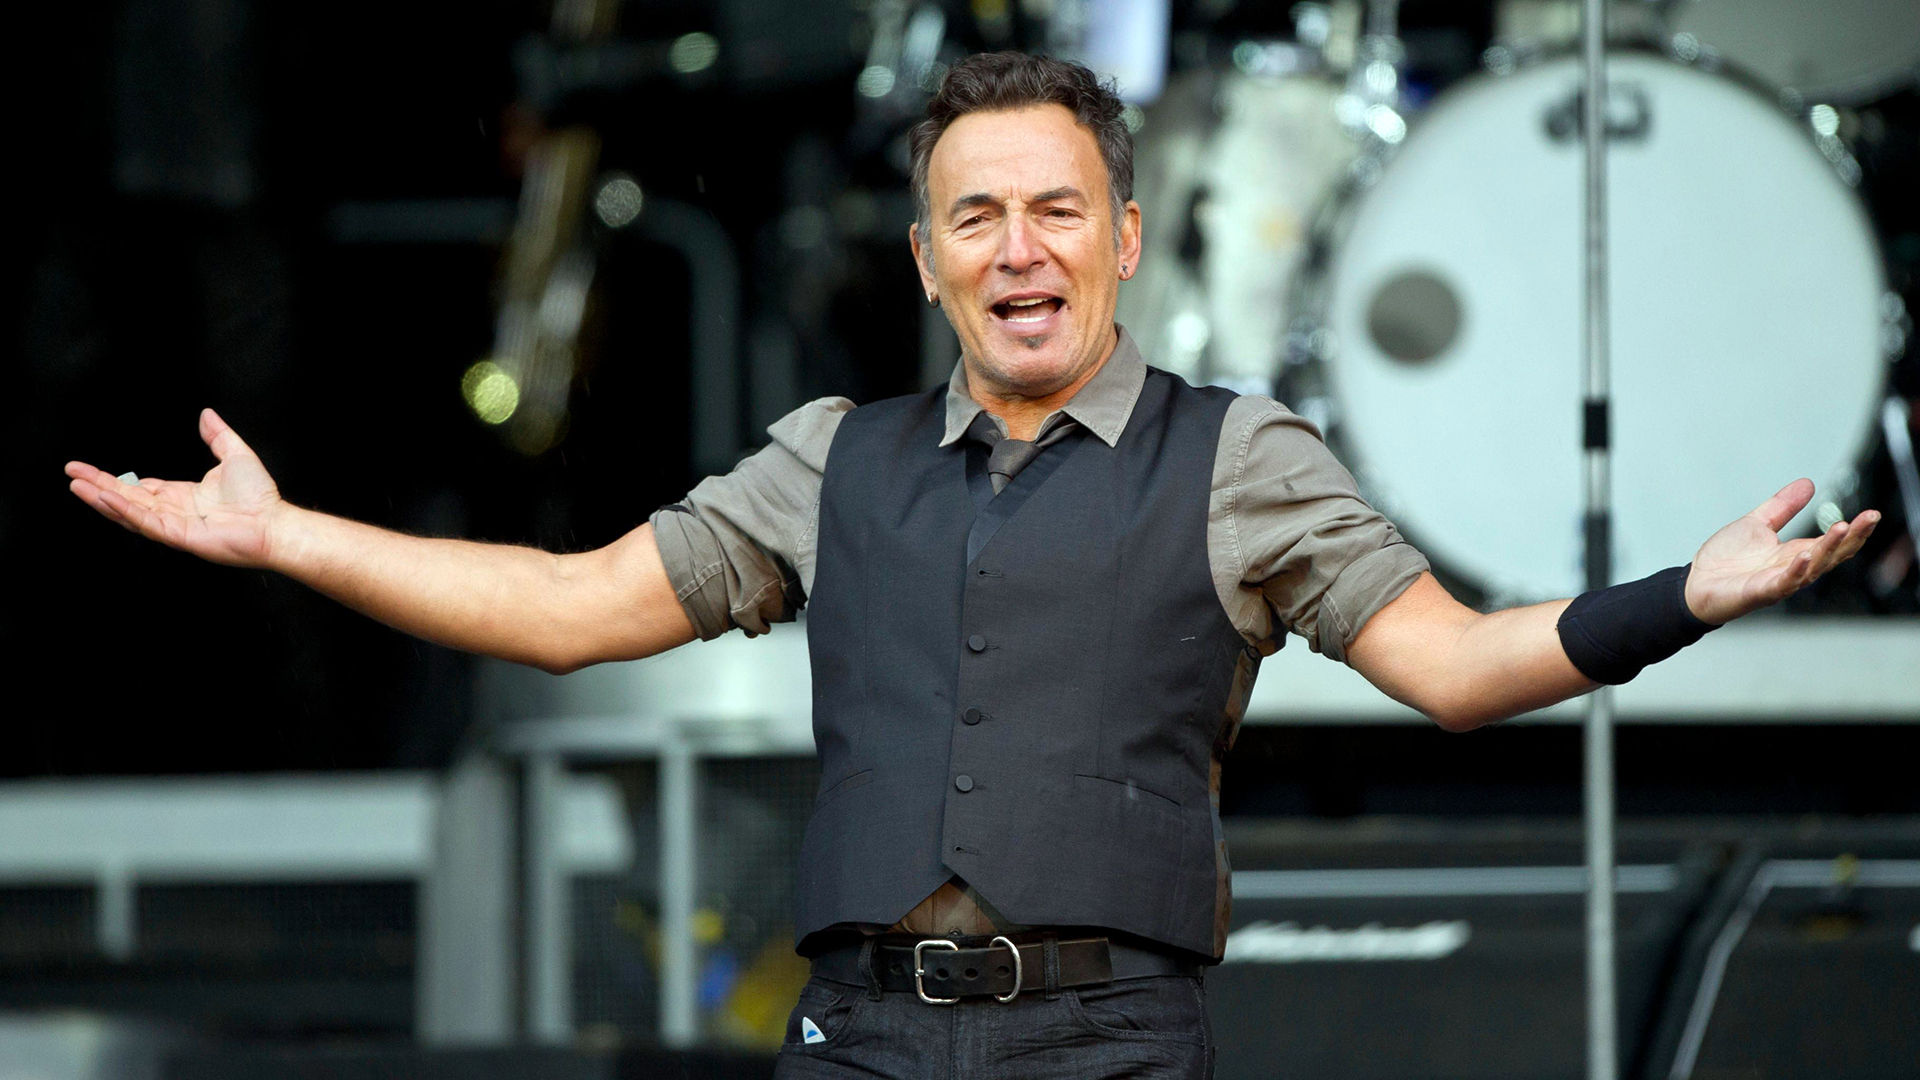 Bruce Springsteen performs at the Olympic Stadium in Munich in 2013. Photo: LUKAS BARTH/dpa/Alamy Live News